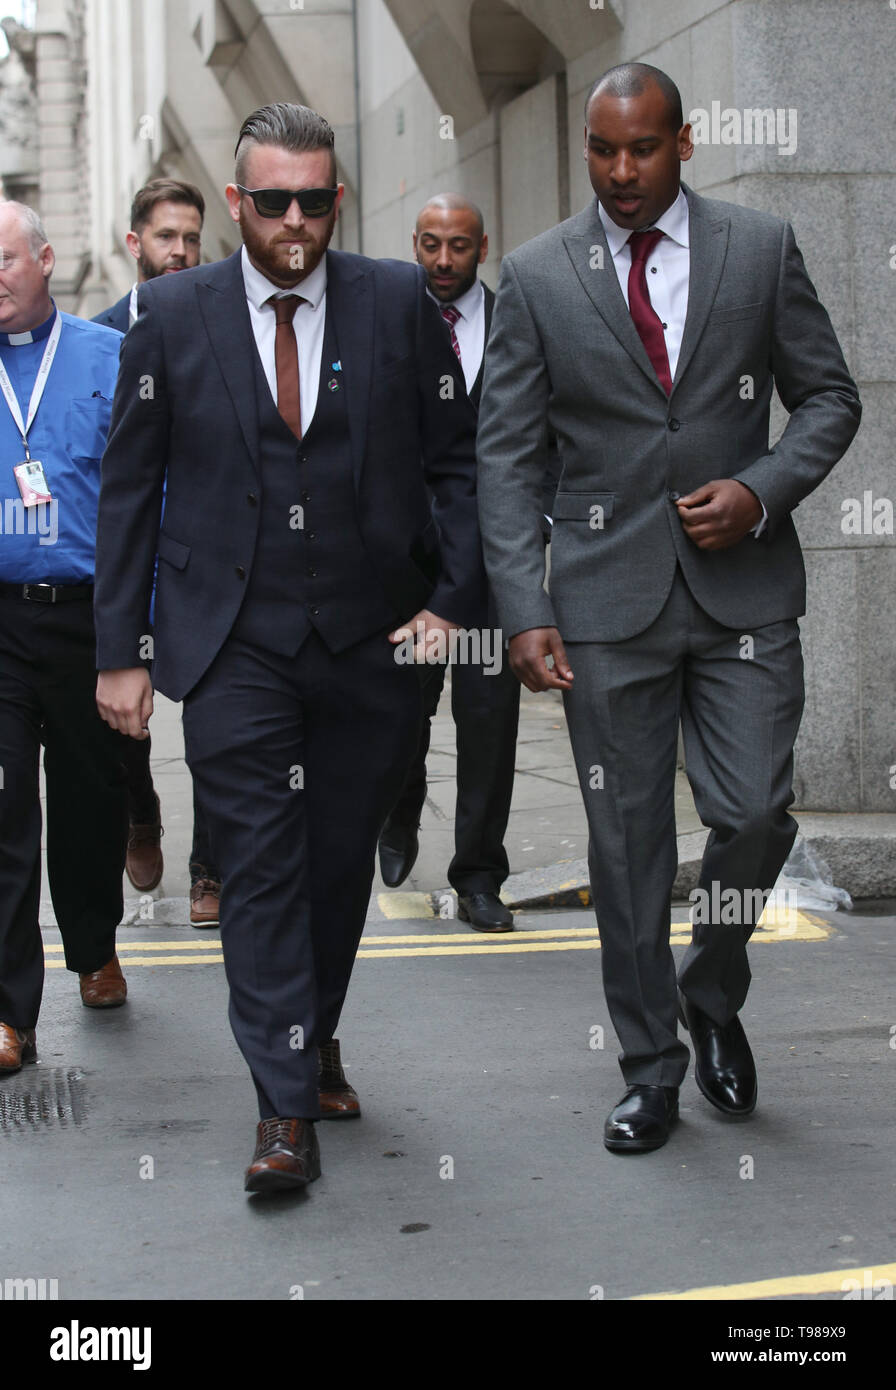 Pc Charlie Guenigault (left) and Pc Wayne Marques arrive at the Old Bailey in London where they will give evidence at the inquest into the London Bridge and Borough Market terror attacks. Stock Photo